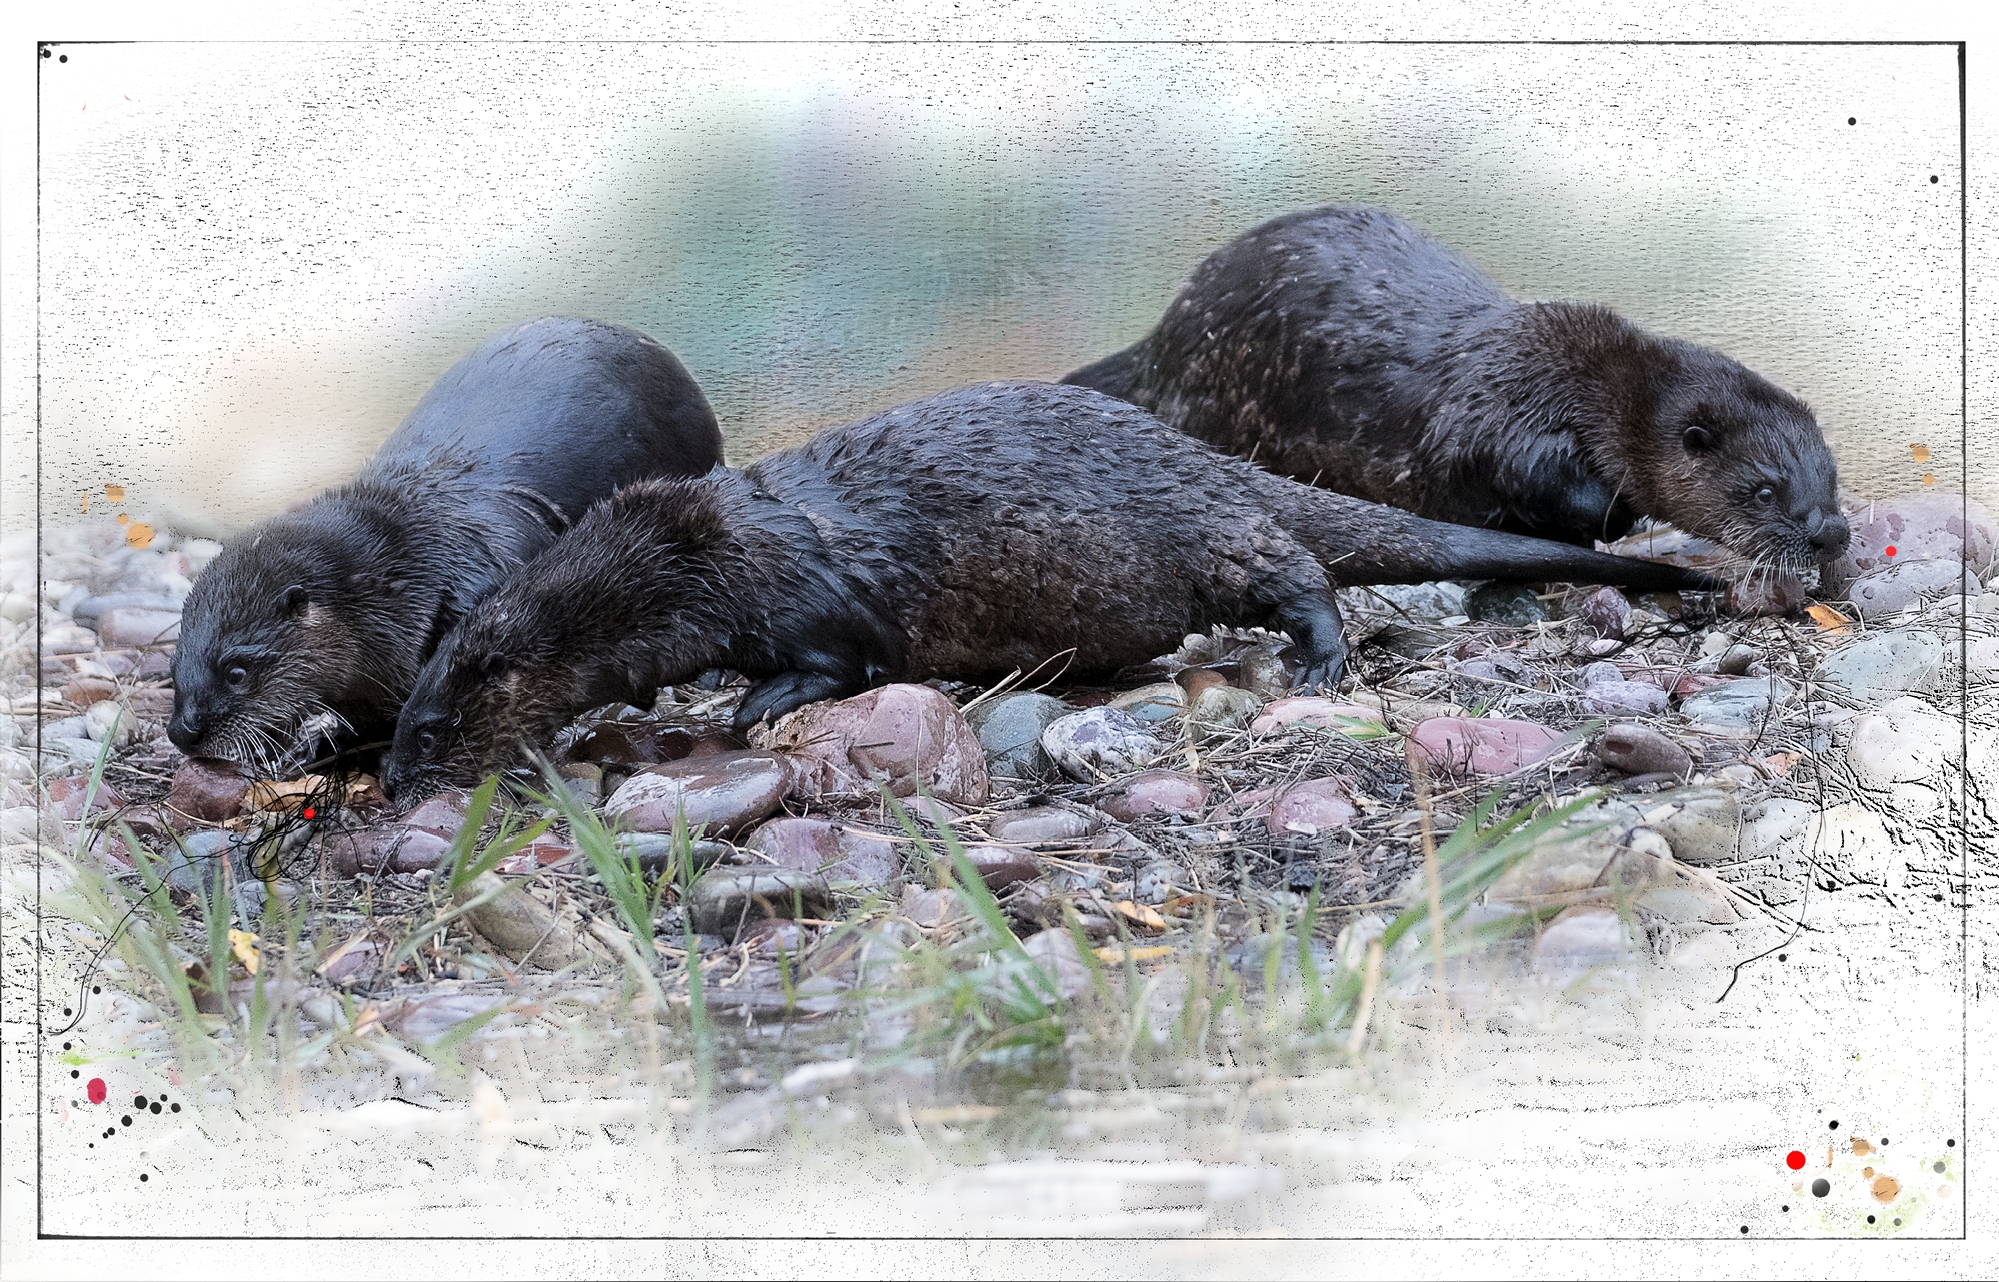 RiverOtters